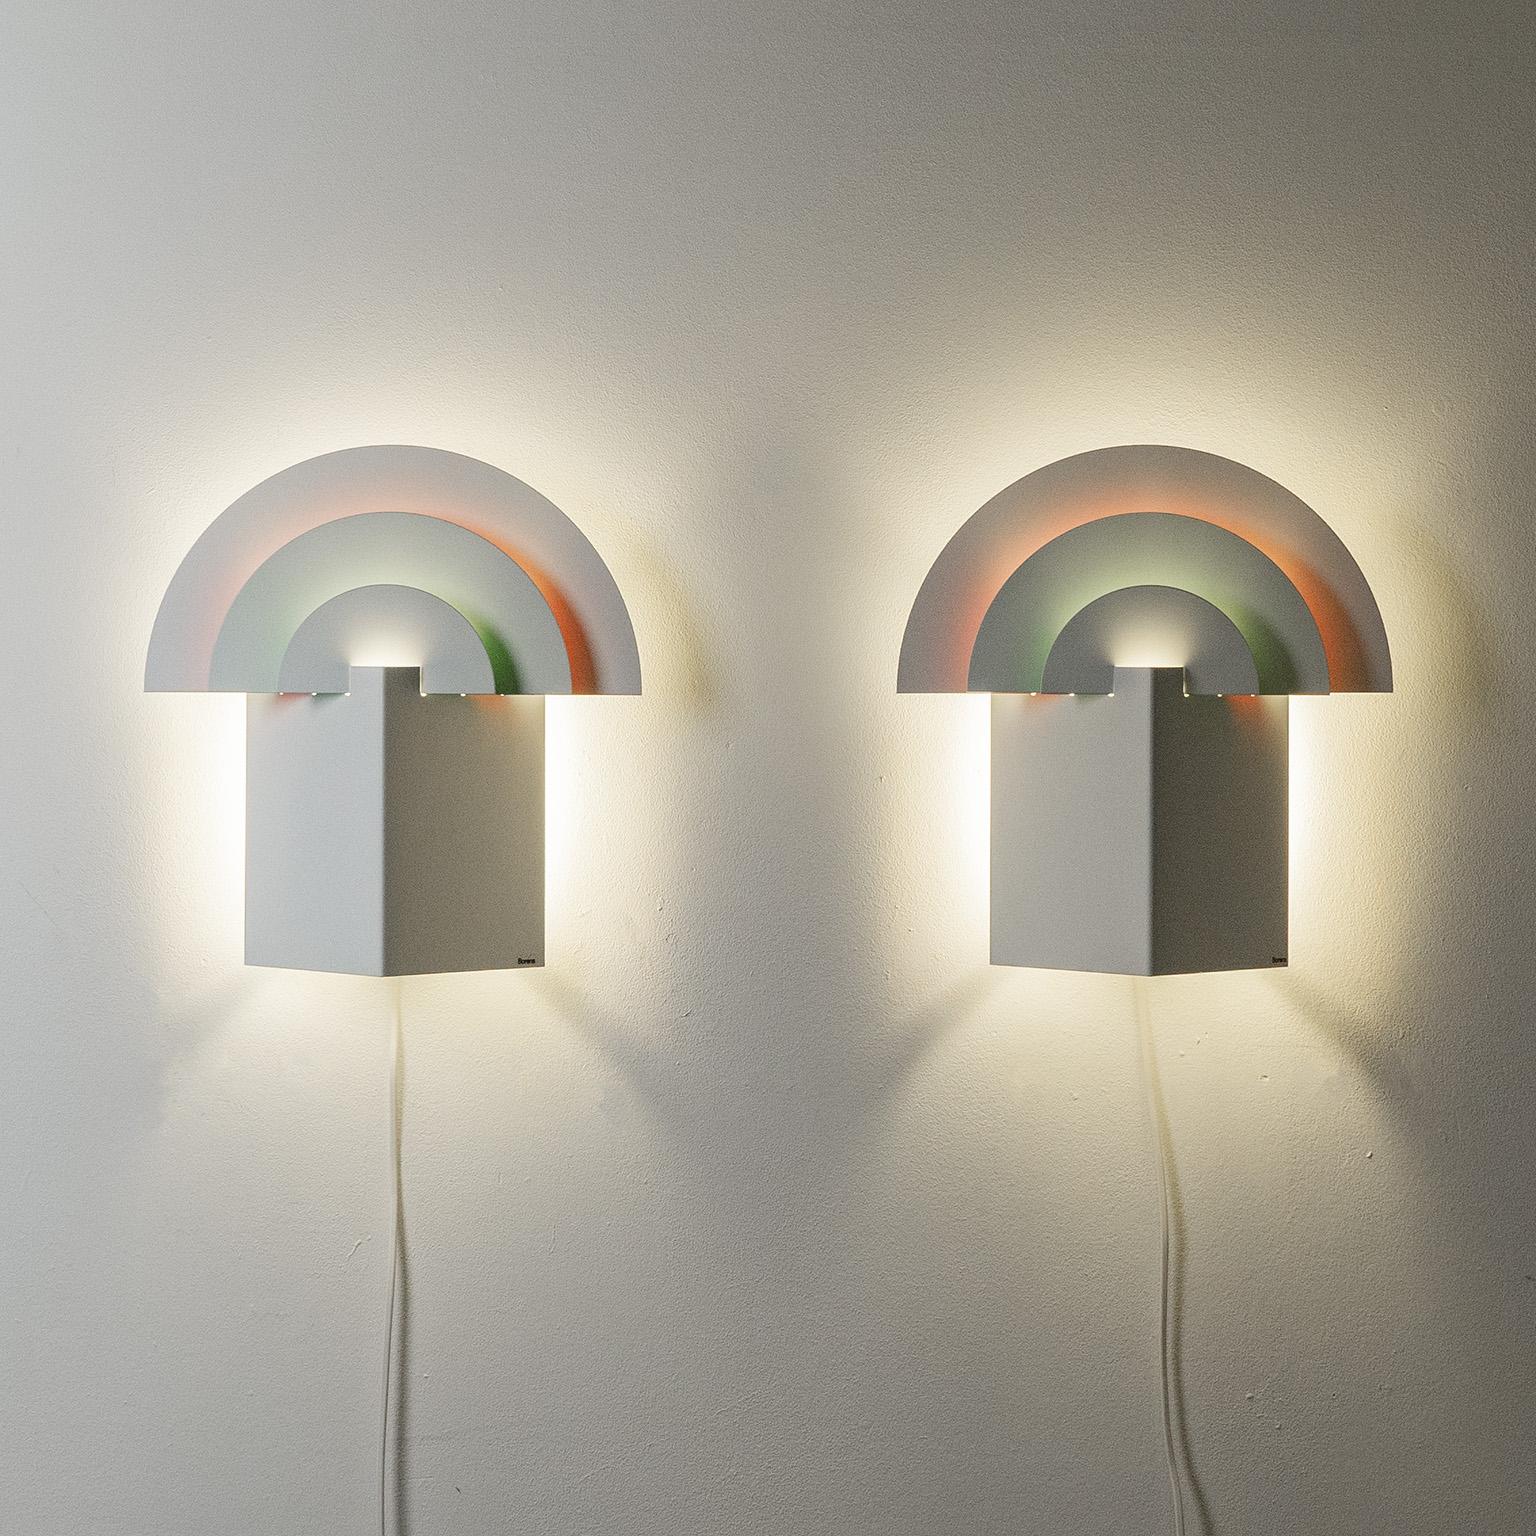 Rare Pair of Post-Modern wall lights by Boréns, manufactured in Sweden in the 1970-1980s. White enameled steel body with an aluminum rainbow-shaped layered top which is painted green and pink on the backside. Very good original condition with just